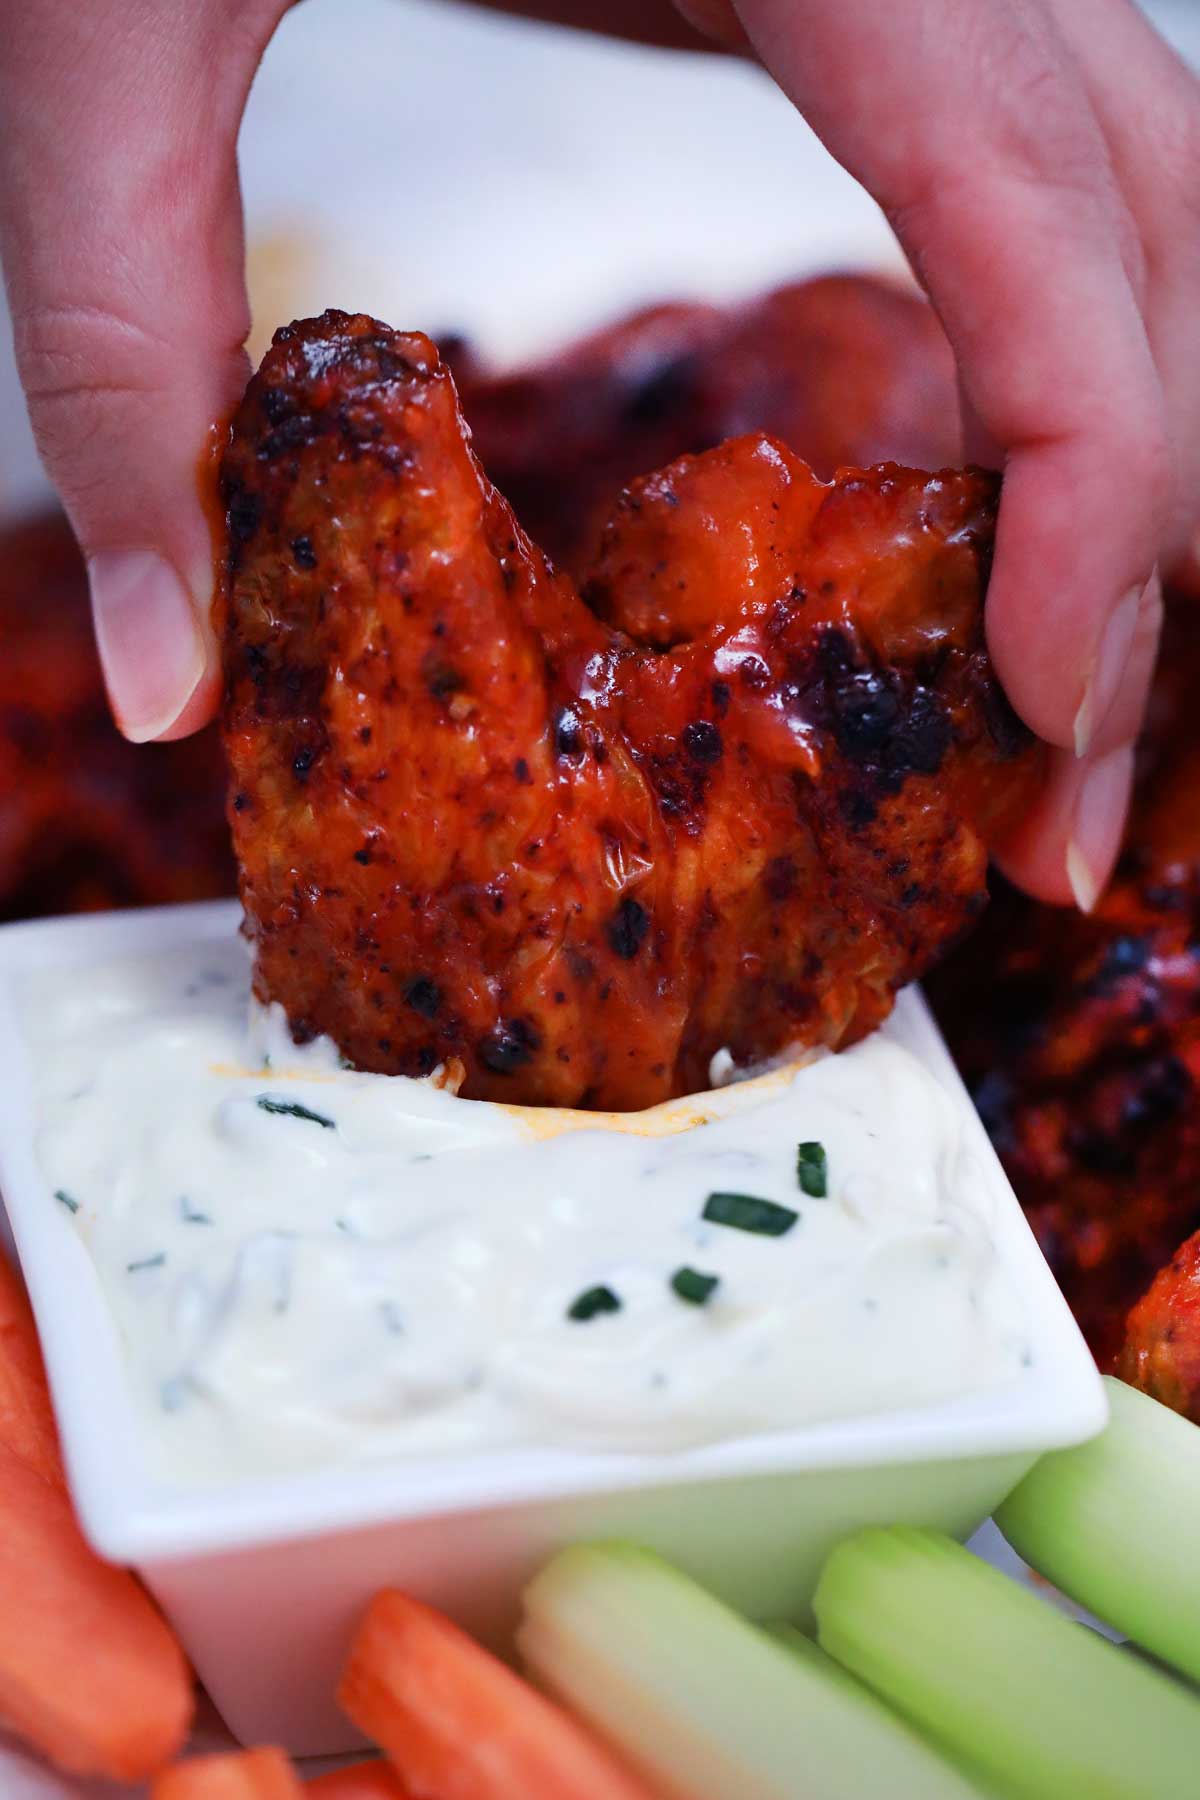 Hand dipping chicken wing